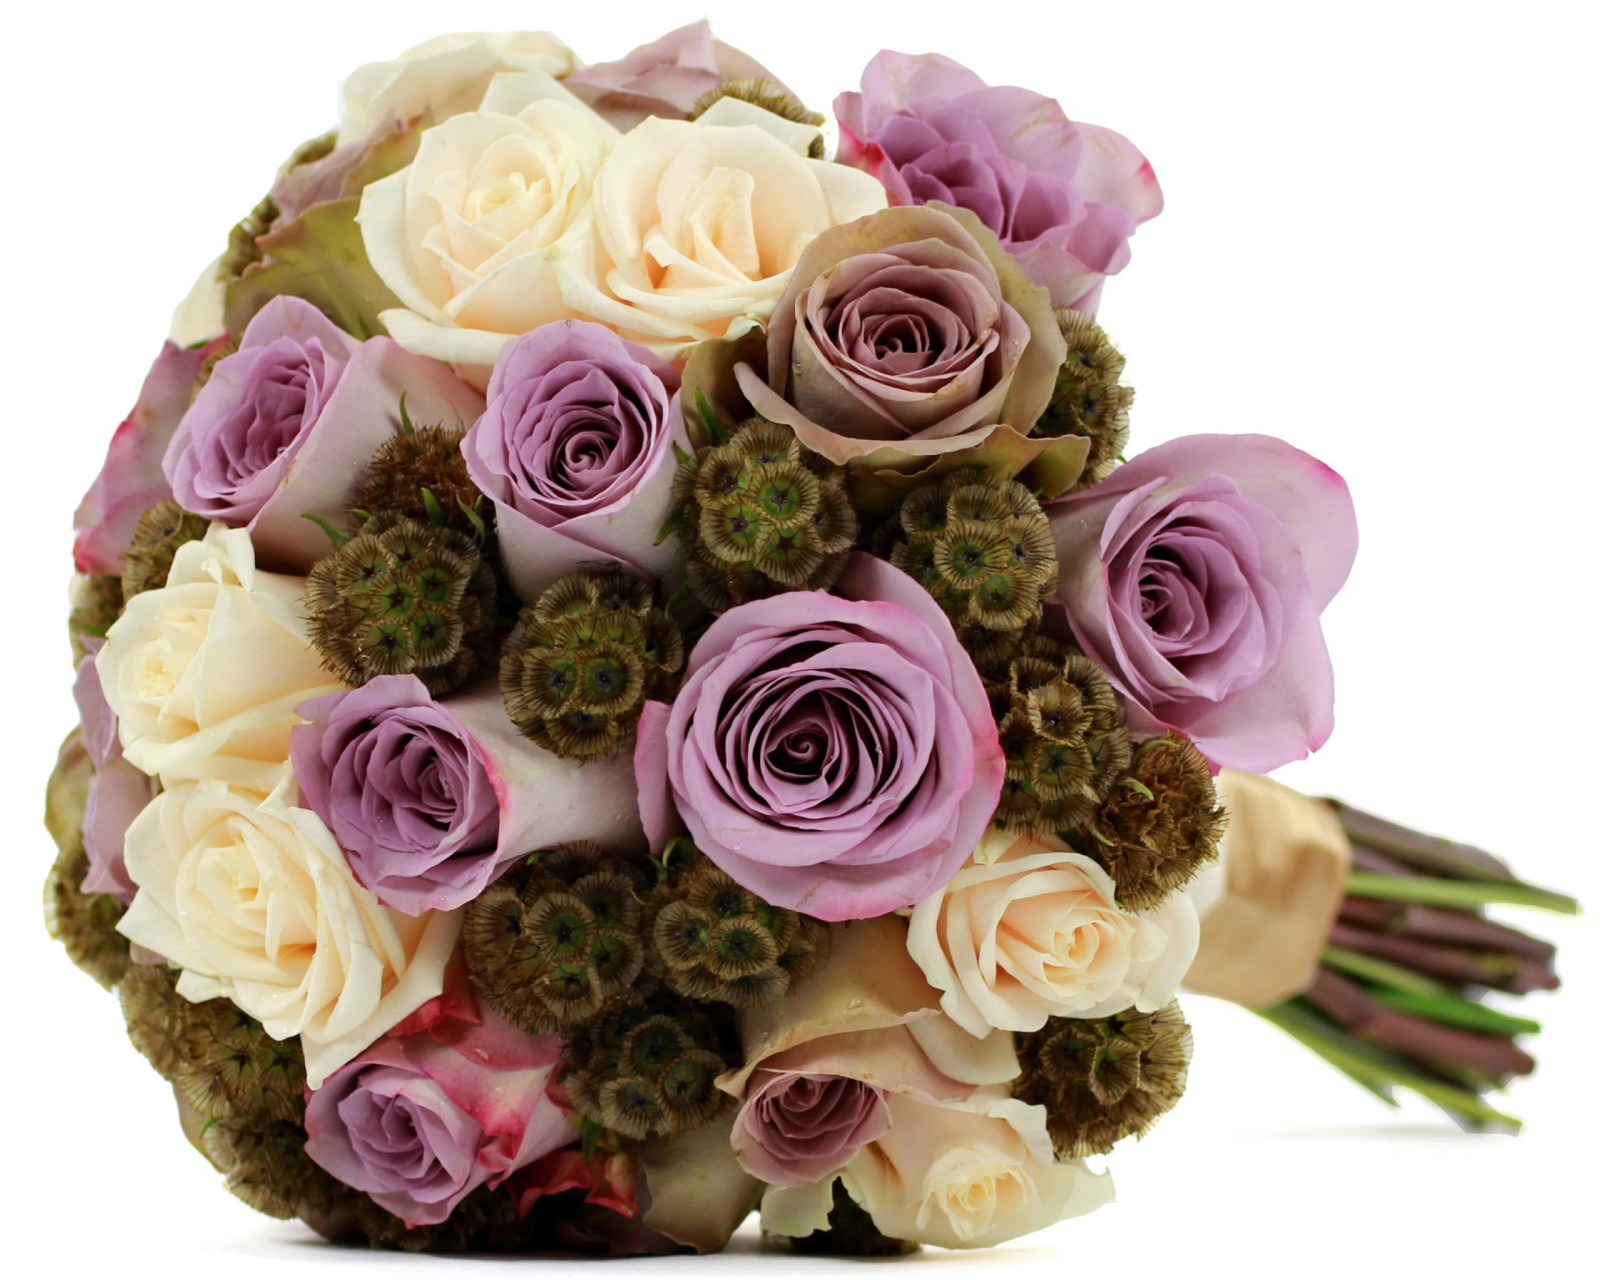 Bouquet with lilac roses screenshot #1 1600x1280